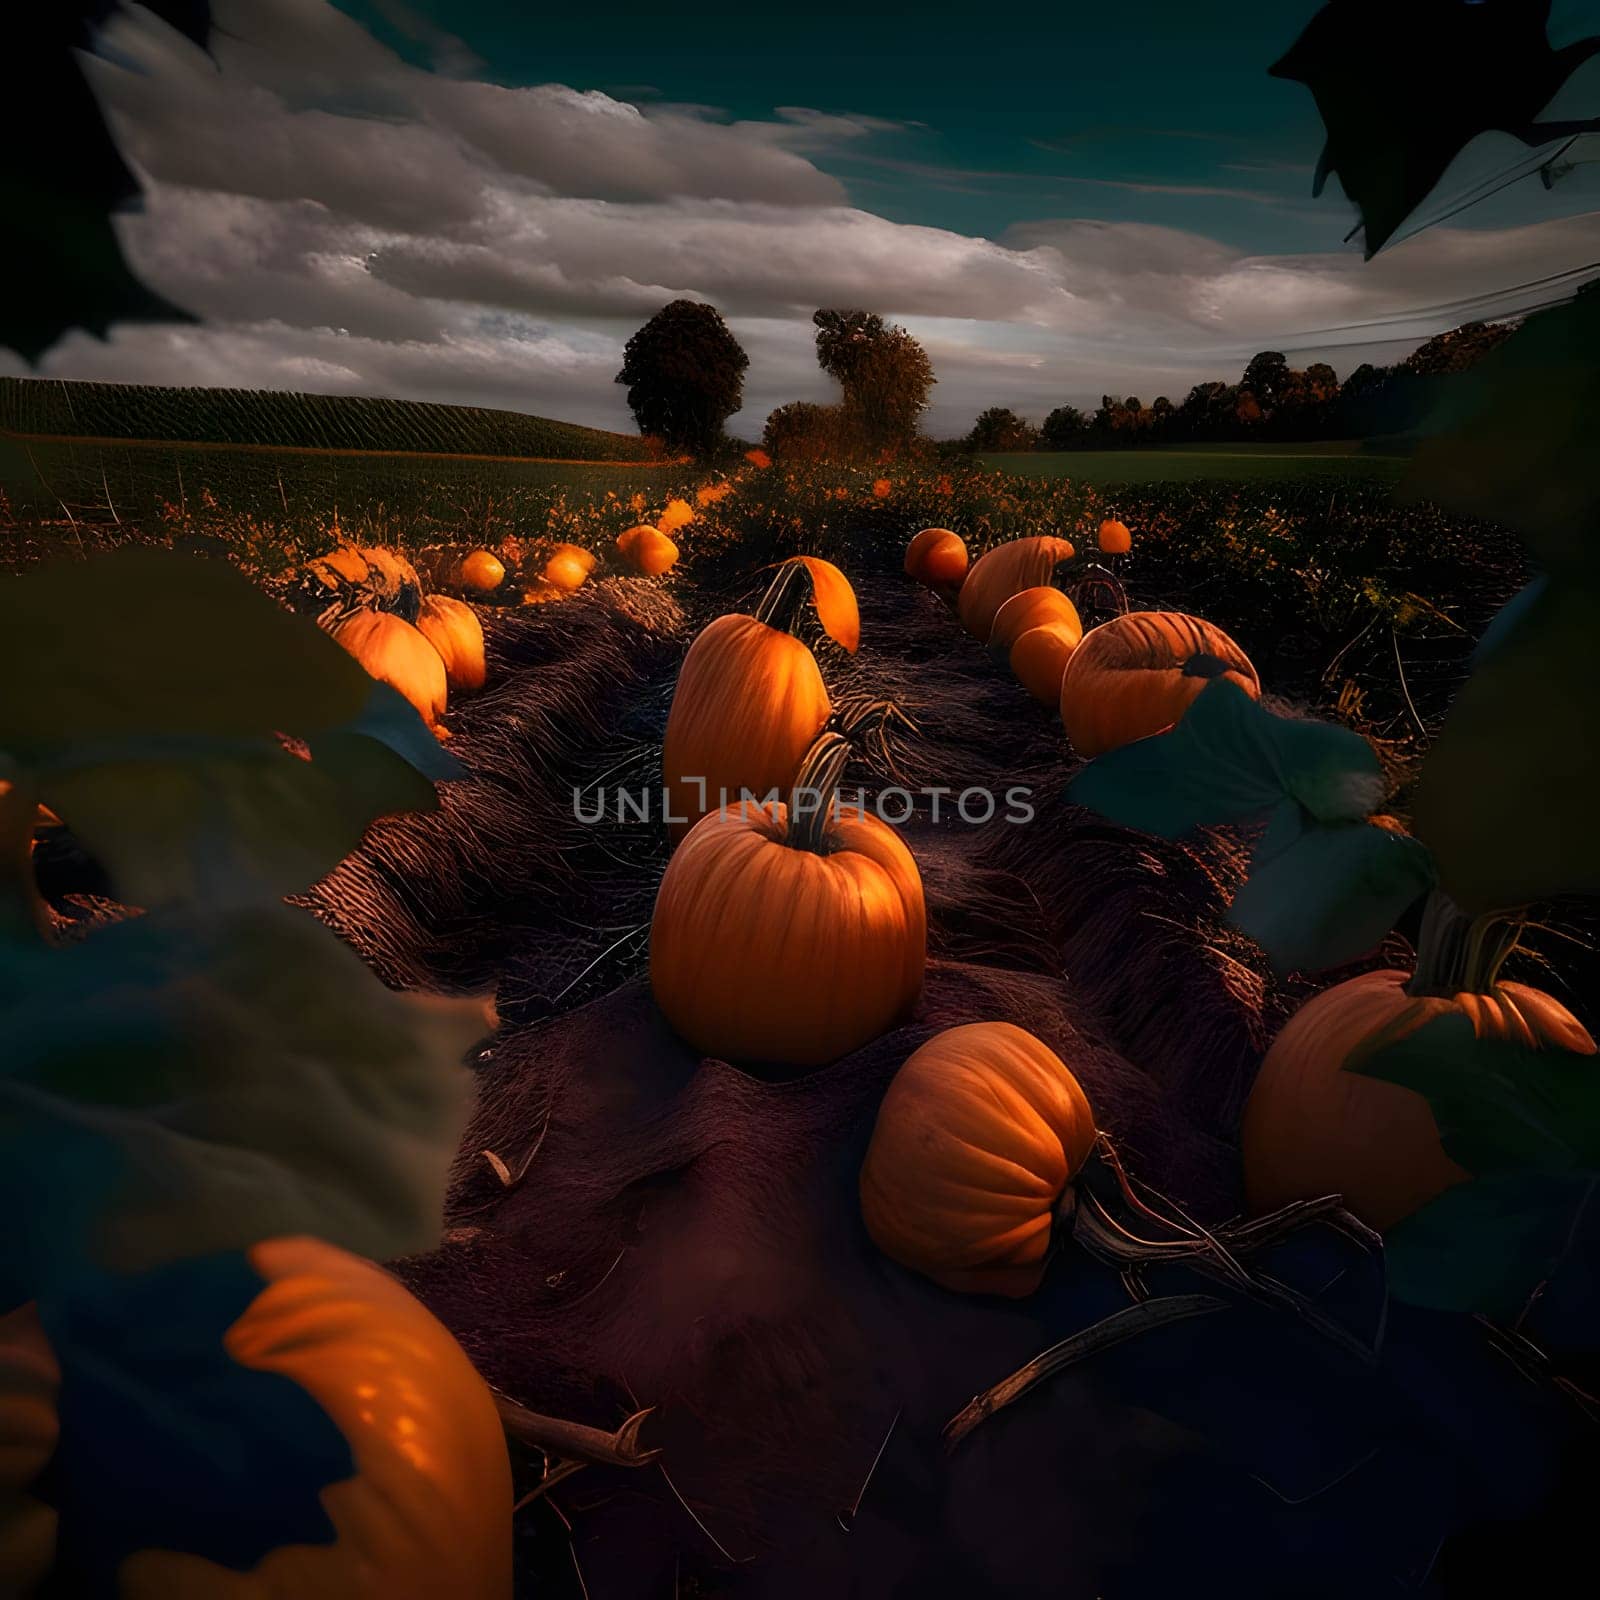 Pumpkin field at dusk. Pumpkin as a dish of thanksgiving for the harvest. An atmosphere of joy and celebration.